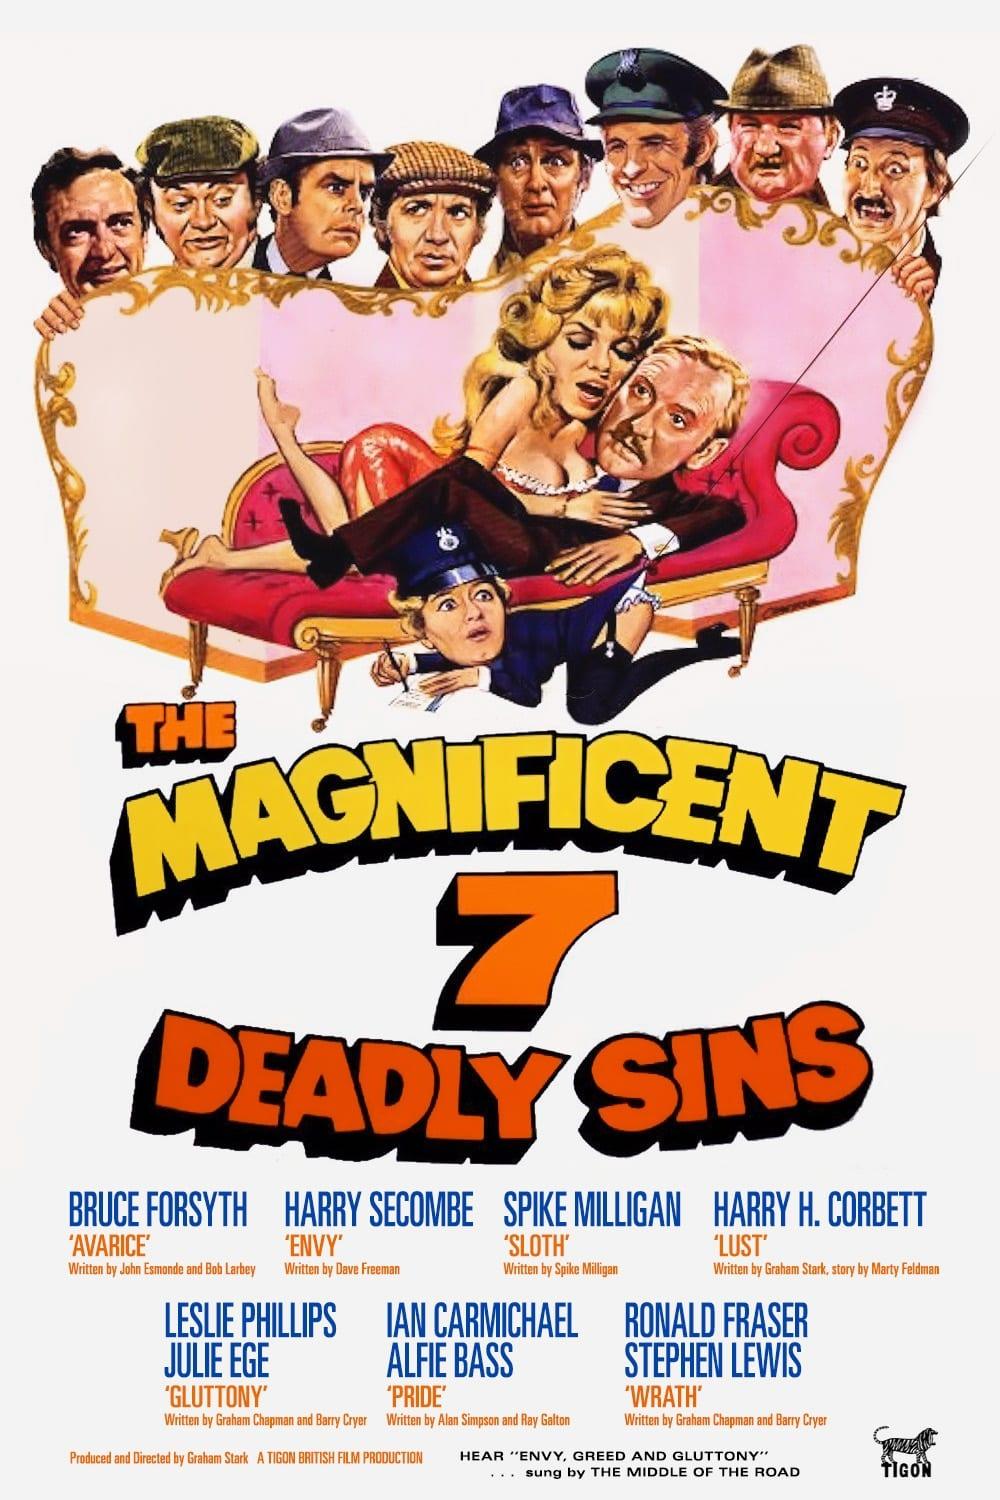 The Magnificent Seven Deadly Sins poster